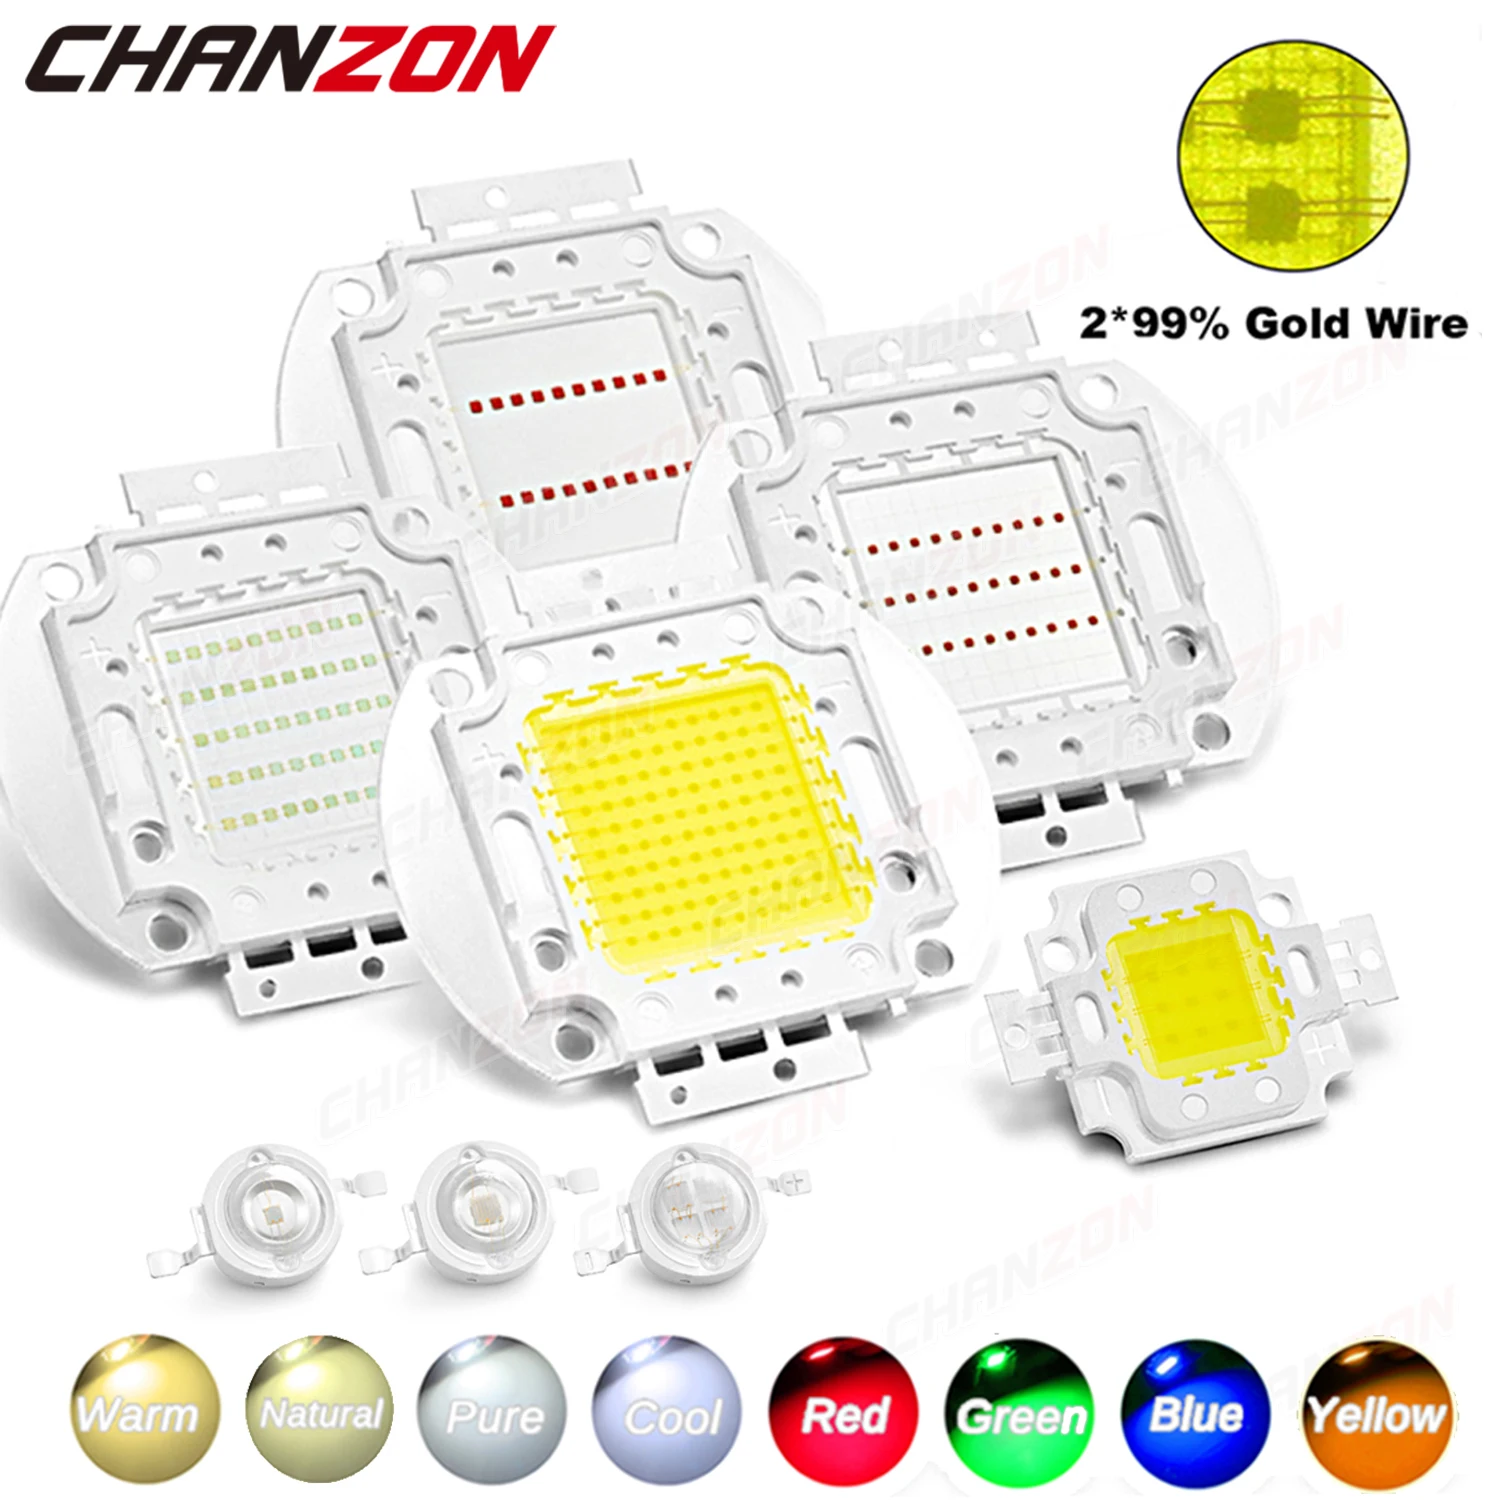 1W 3W 5W 10W 20W 30W 50W 100W High Power LED Chip Warm Cool White Red Green Blue Square Light Matrix Integrated COB Lamp relife rl 004fa 2 in 1 for ipx 14 dot matrix cpu maintenance multifunctional high temperature heat insulation pad anti static